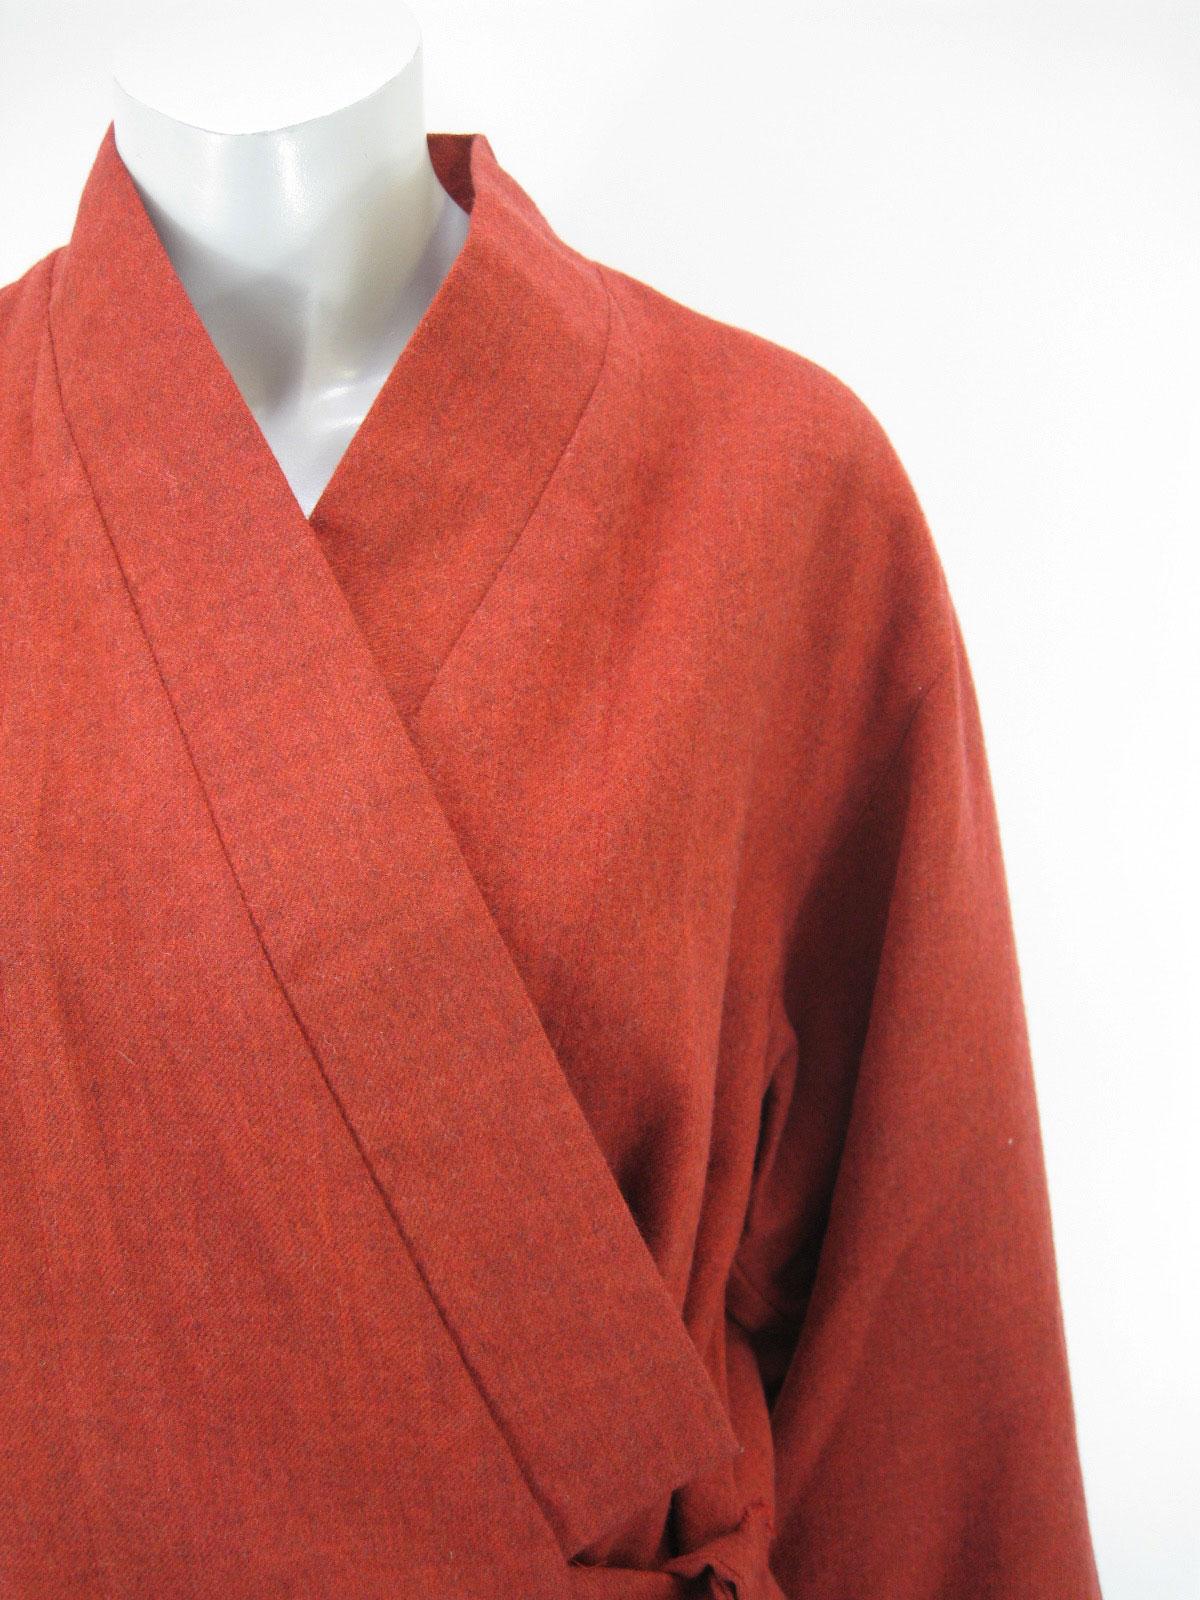 Vintage Kenzo Paris short wool kimono style jacket.

Wrap front with inside and outside ties.

Wide loose sleeves.

Fabric is wool. Red with woven black undertones.

Partial lining is cotton.

No size tag.

Made in France.

This item is in very good